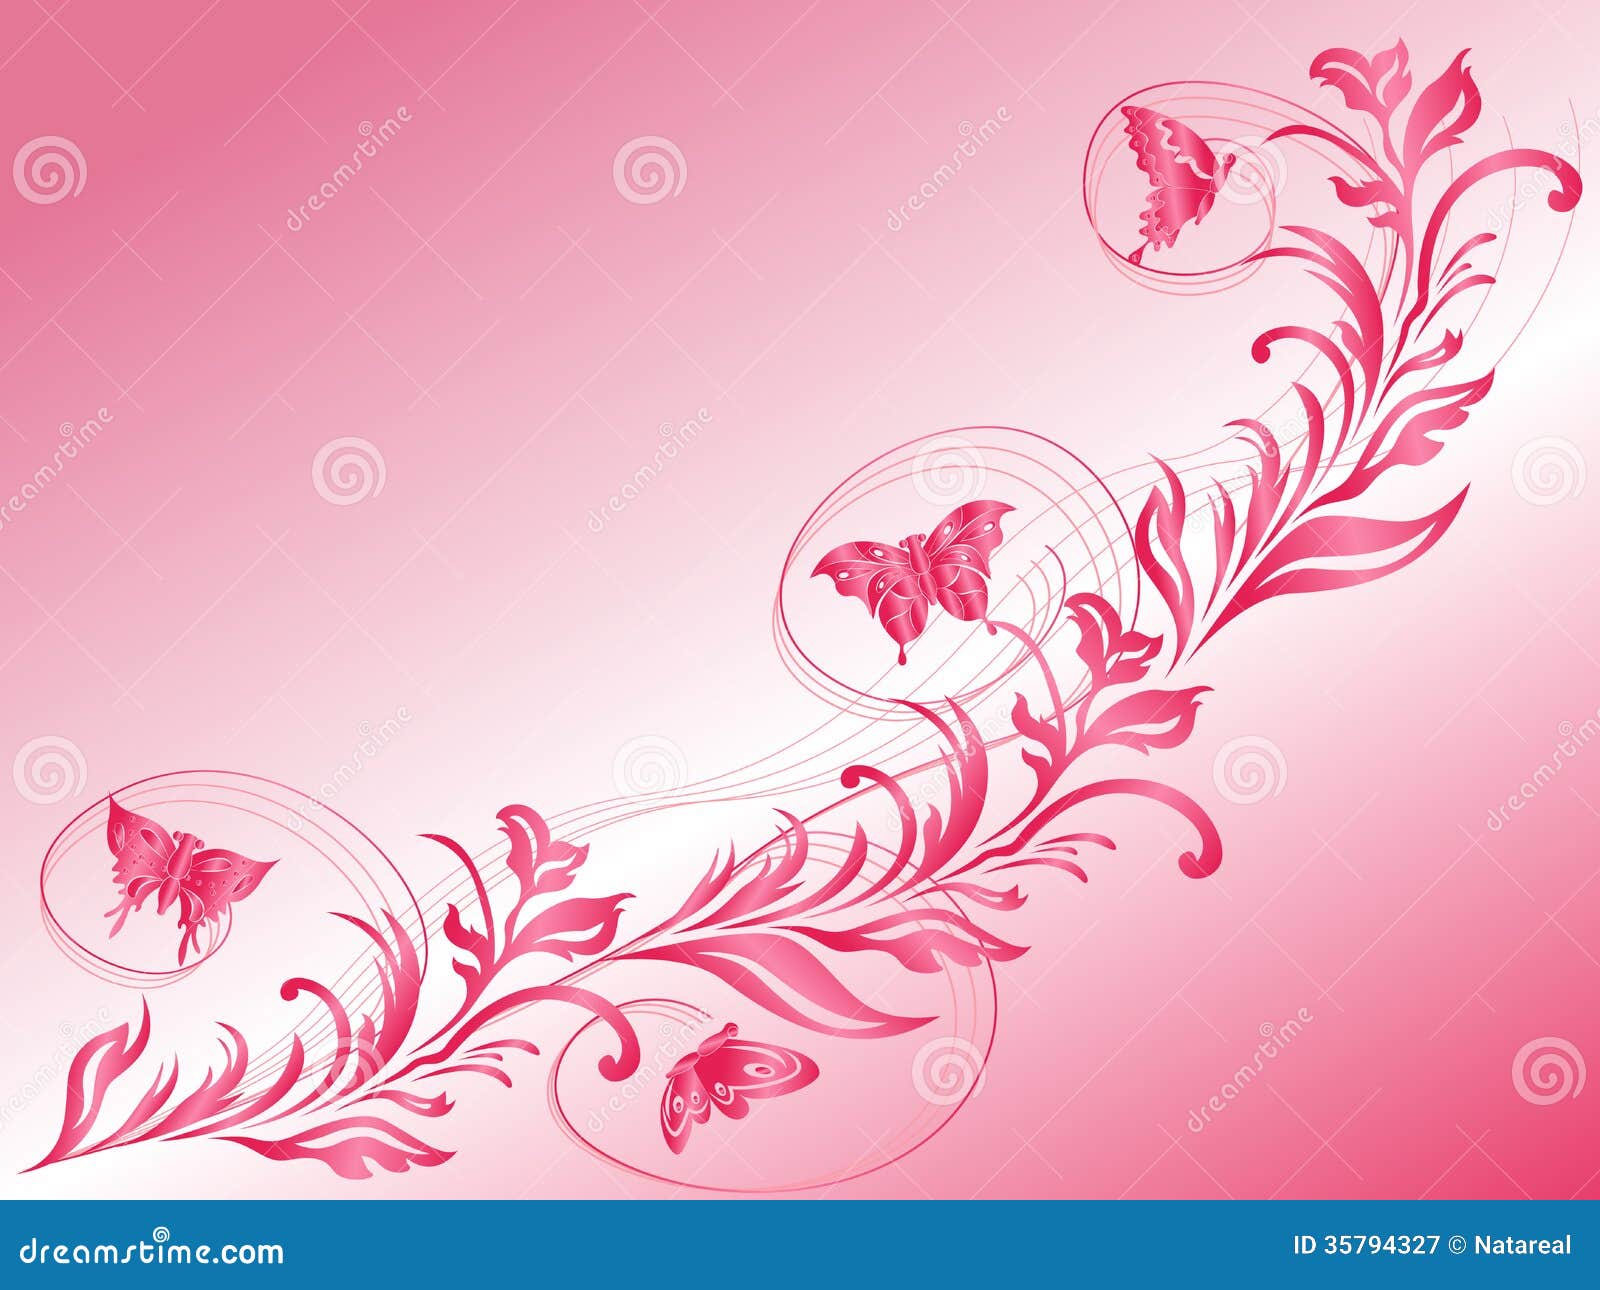 Butterflies Flying Over a Beautiful Twig Stock Vector - Illustration of ...